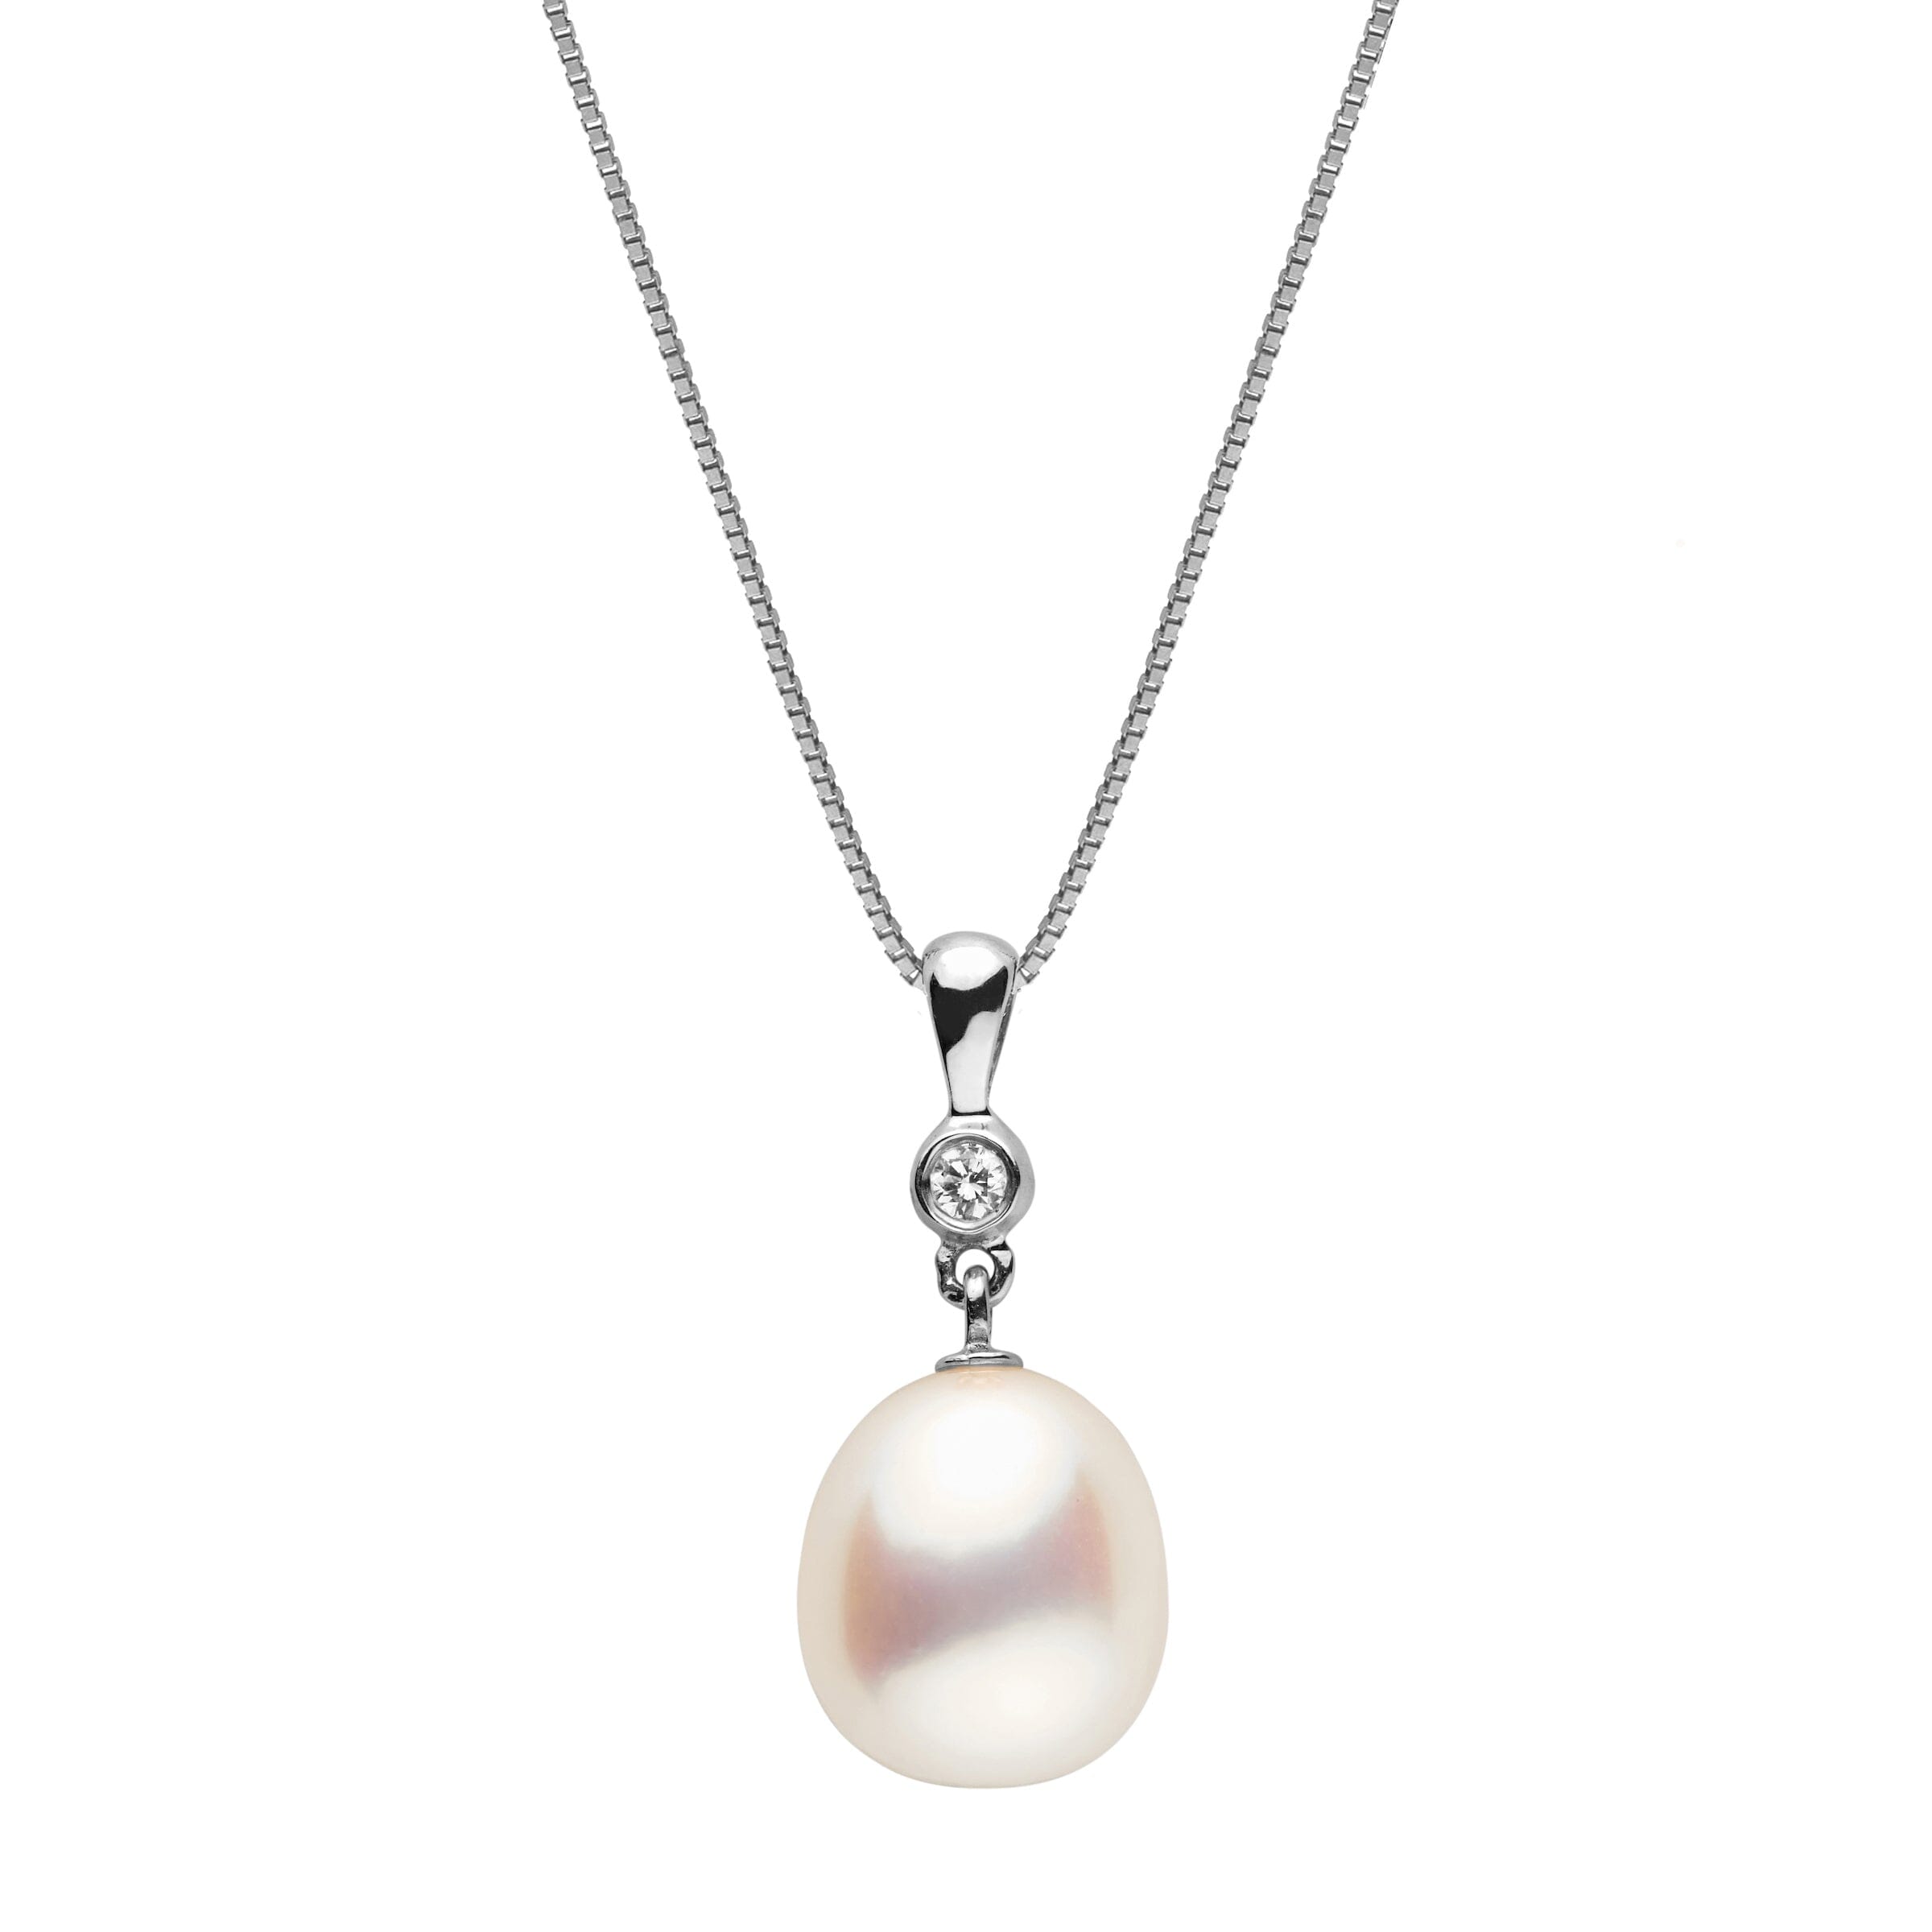 10.0-11.0 mm AAA White Freshwater Drop Pearl and Diamond Romantic Collection Pendant